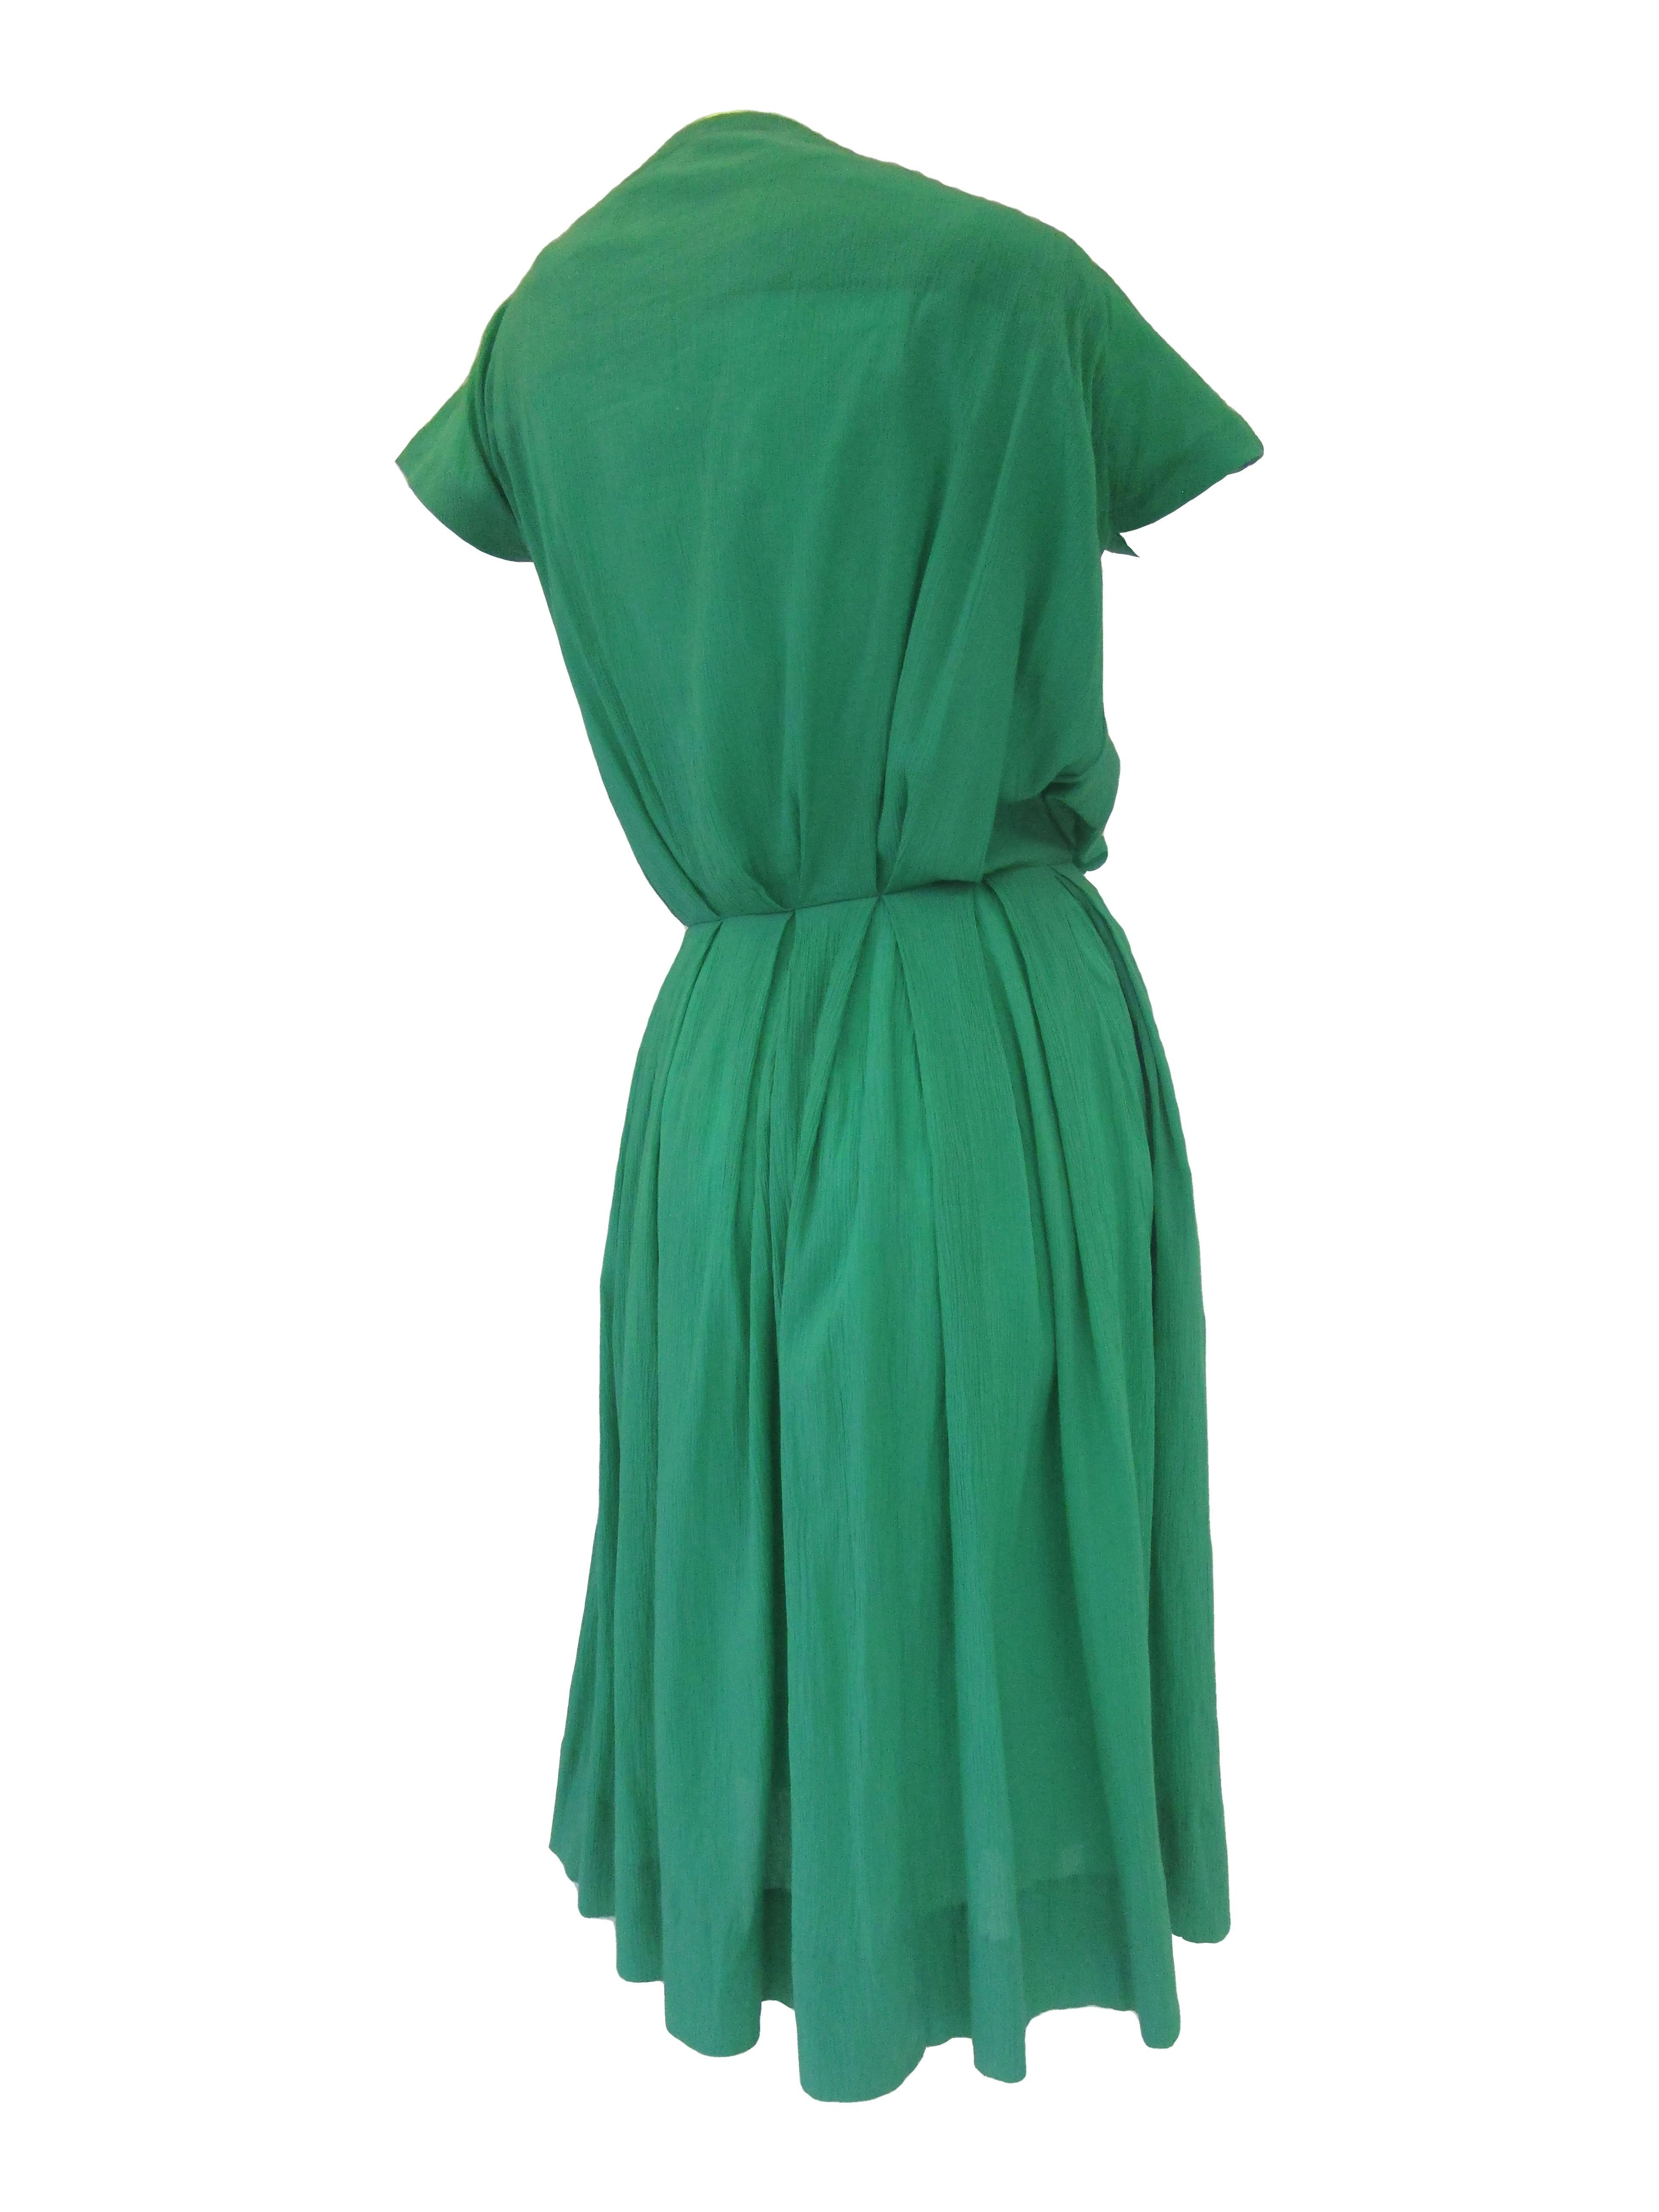 1950's Claire McCardell for Townley Kelly Green Crinkled Viscose Dress In Good Condition For Sale In Houston, TX